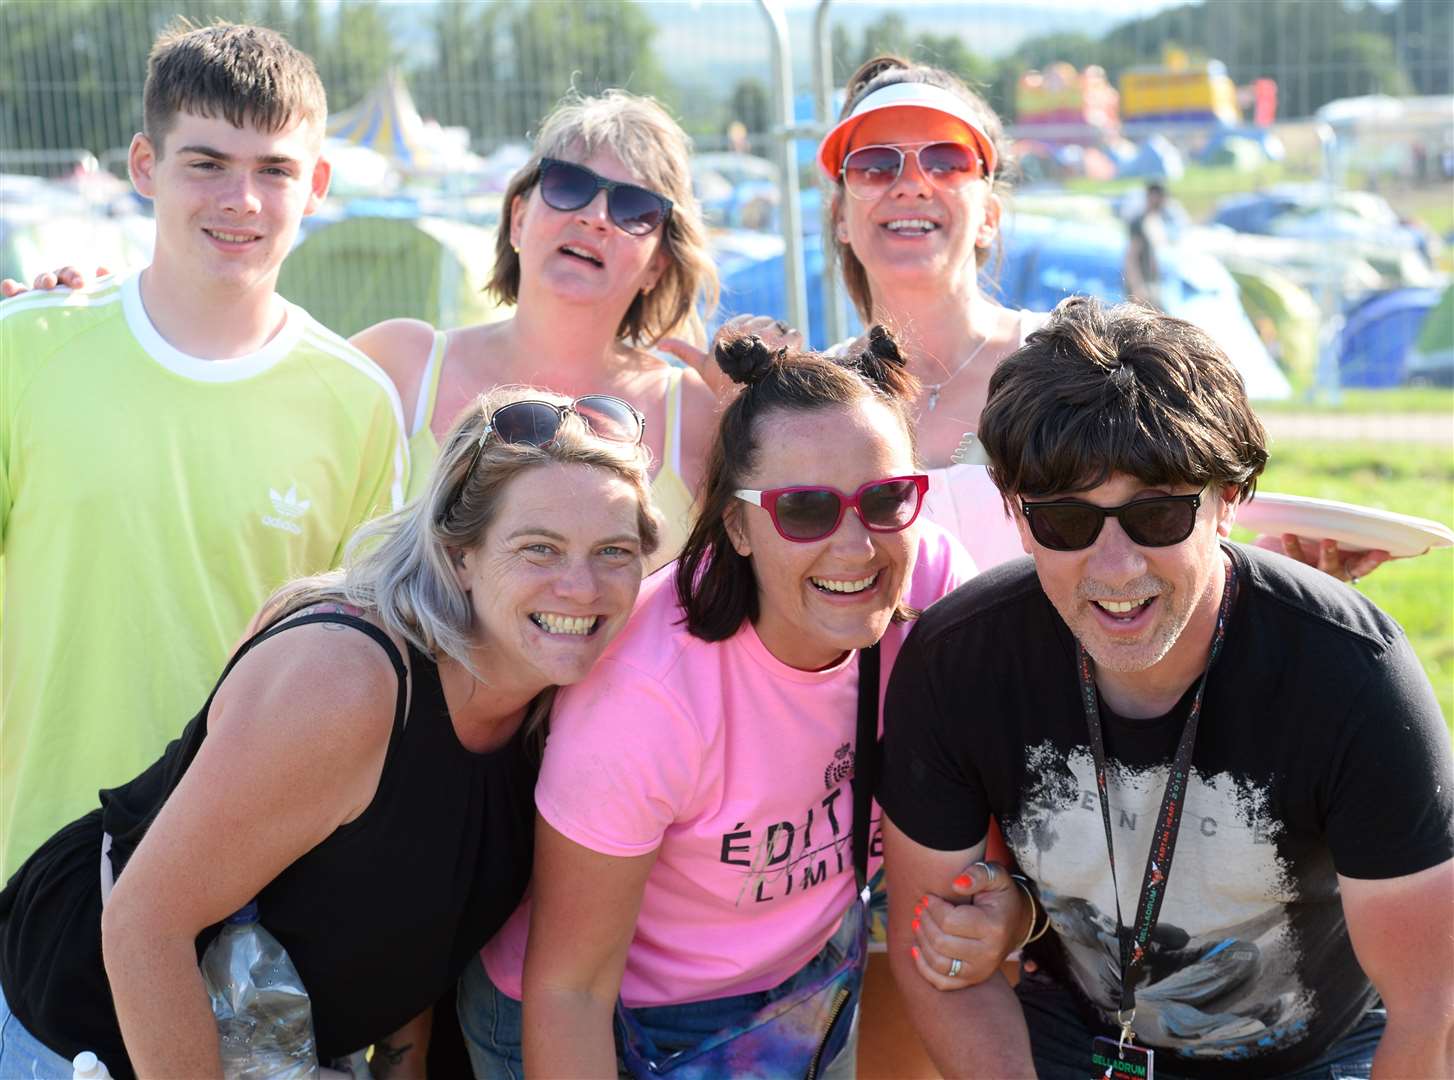 Belladrum 2019..(back)Aiden and Laura Thomson,Marlene Forsyth(front)Sarah Morrison with Nicola and Gordon Duthie...Picture: Gary Anthony. Image No.044555.